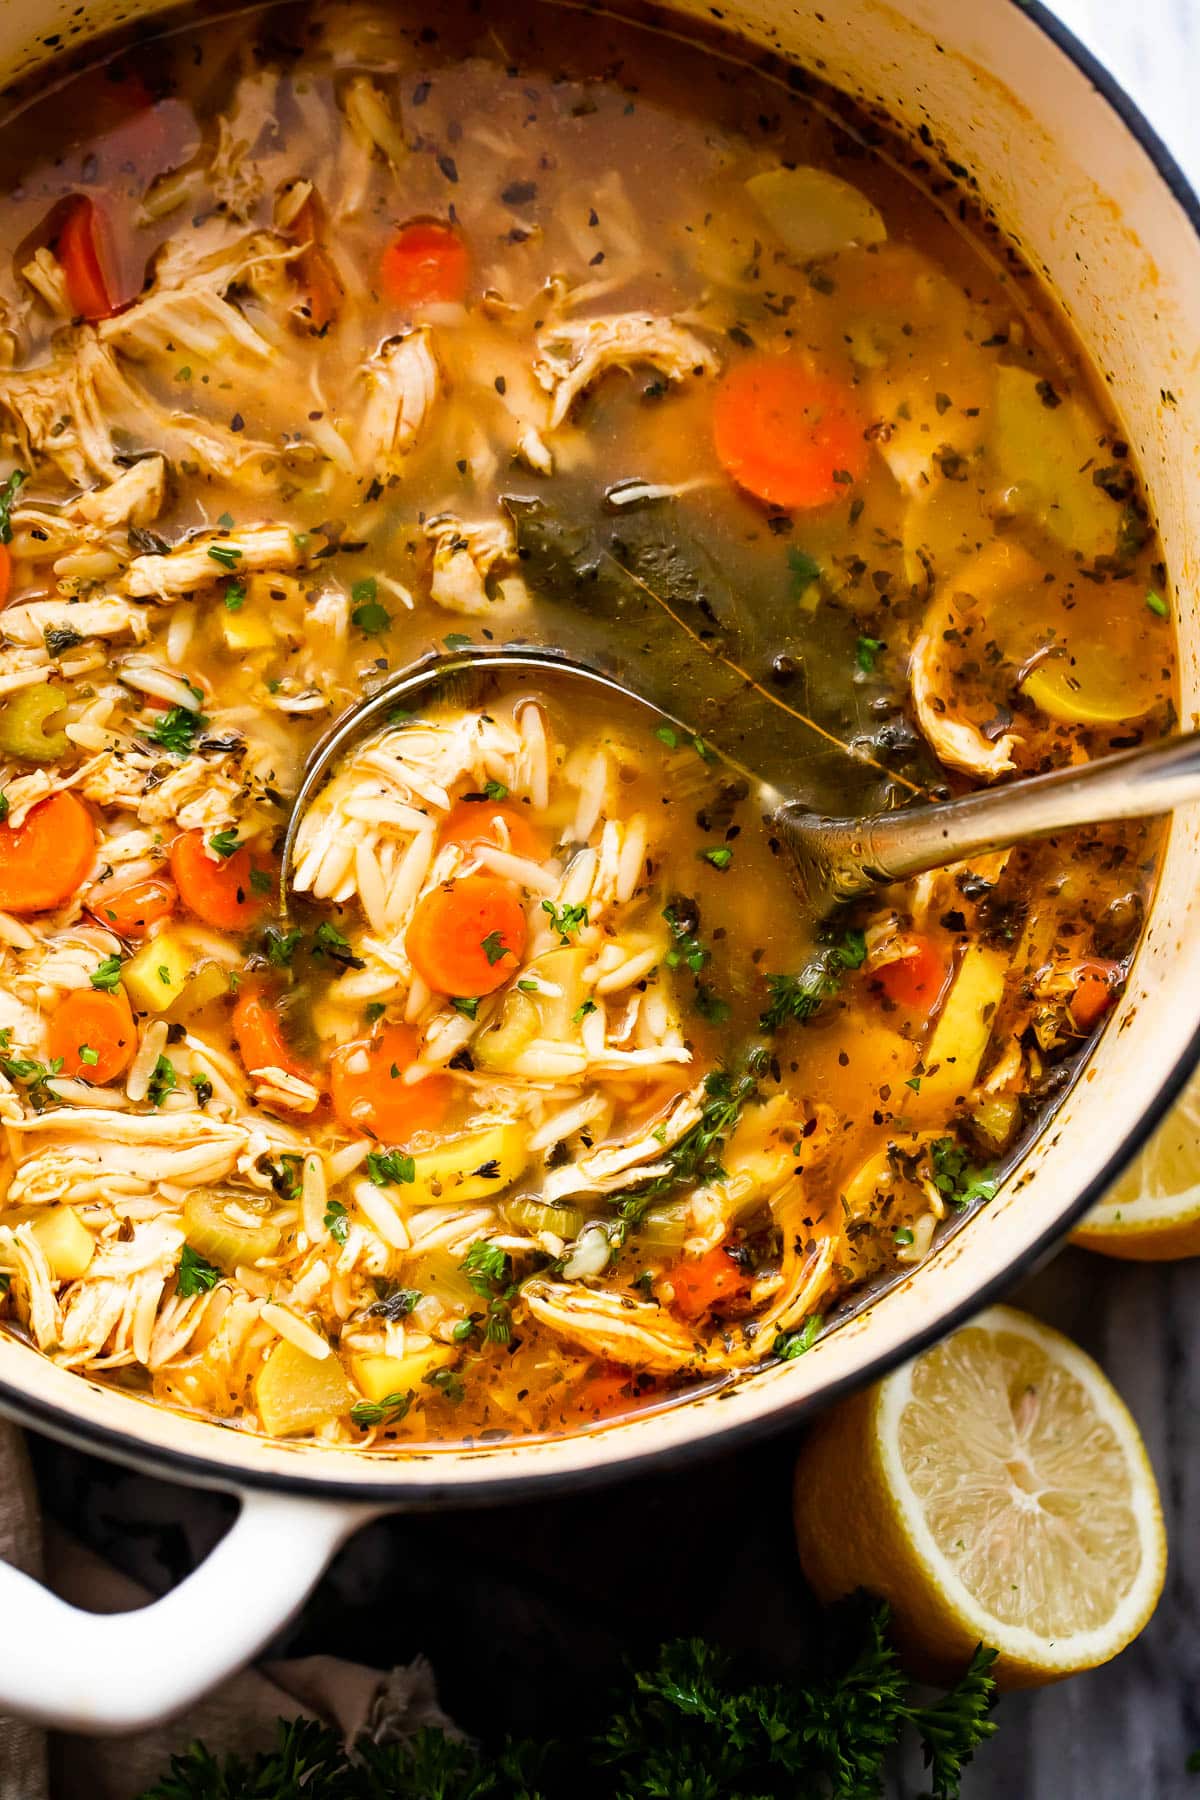 A Dutch oven filled with Chicken soup and orzo.